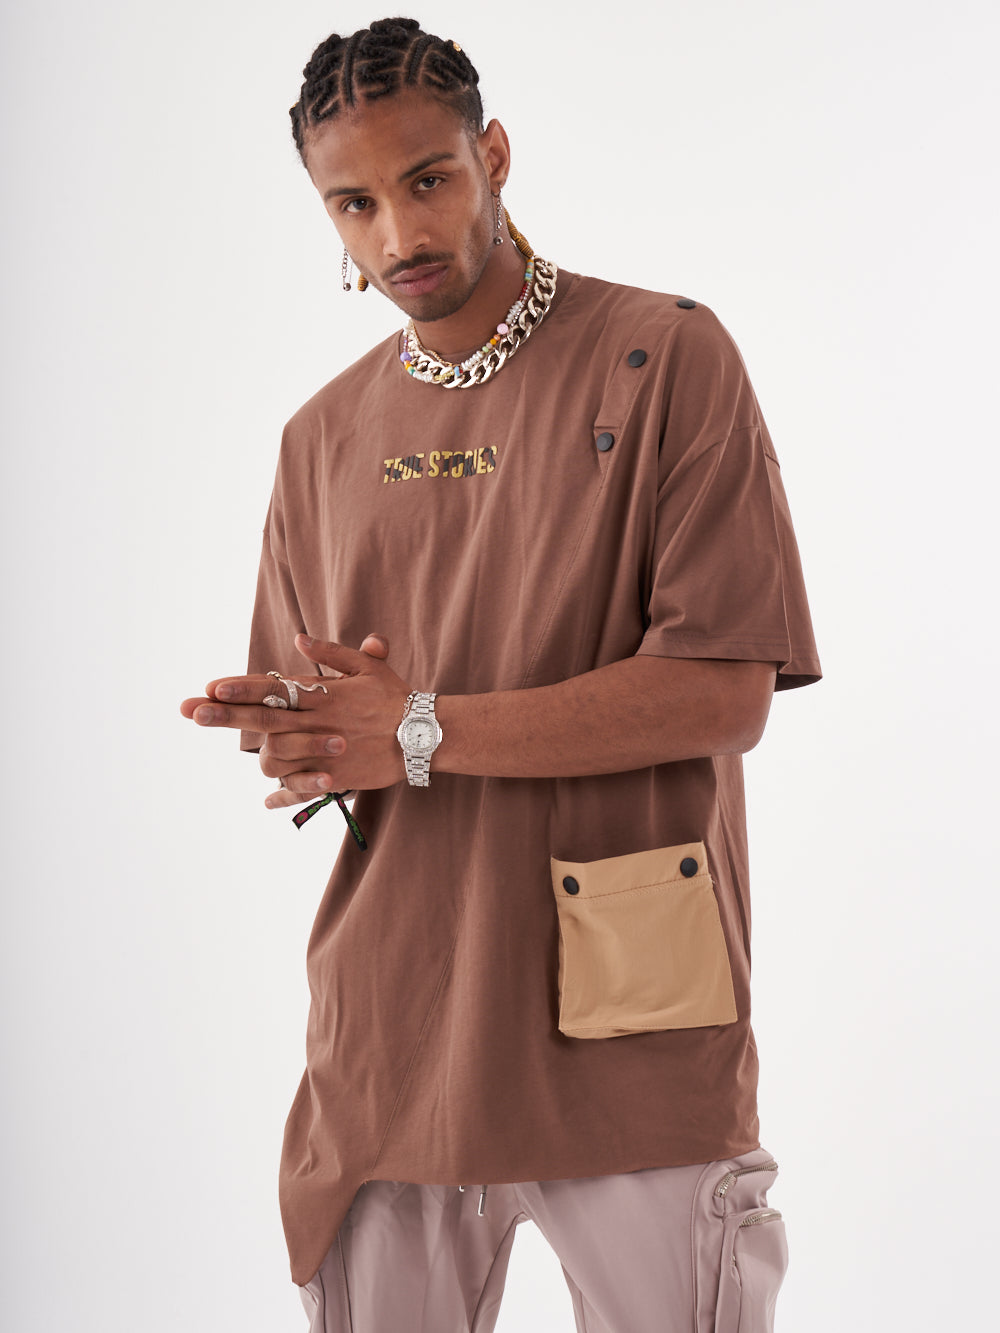 The model is wearing a brown BEATNIK T-SHIRT with a pocket.